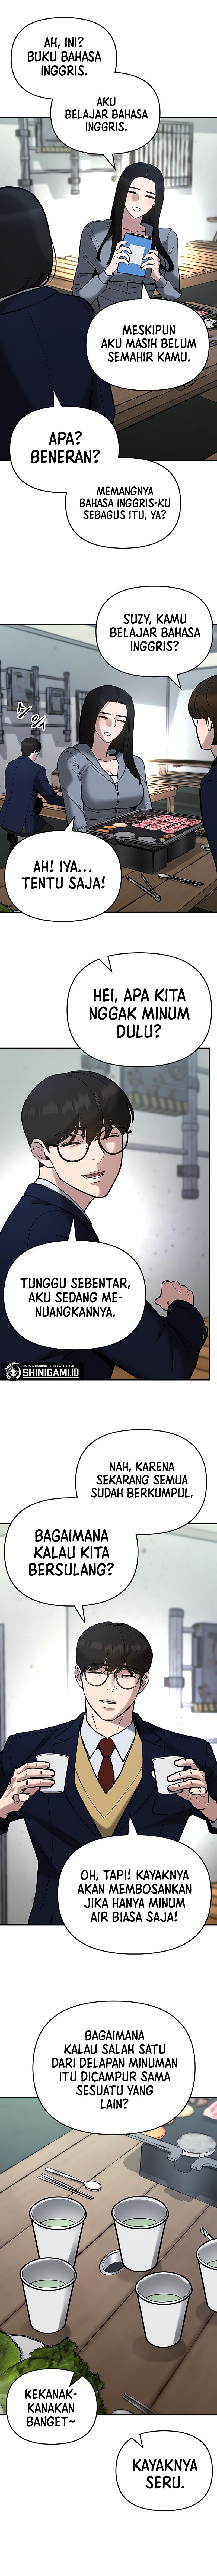 the-bully-in-charge Chapter 53